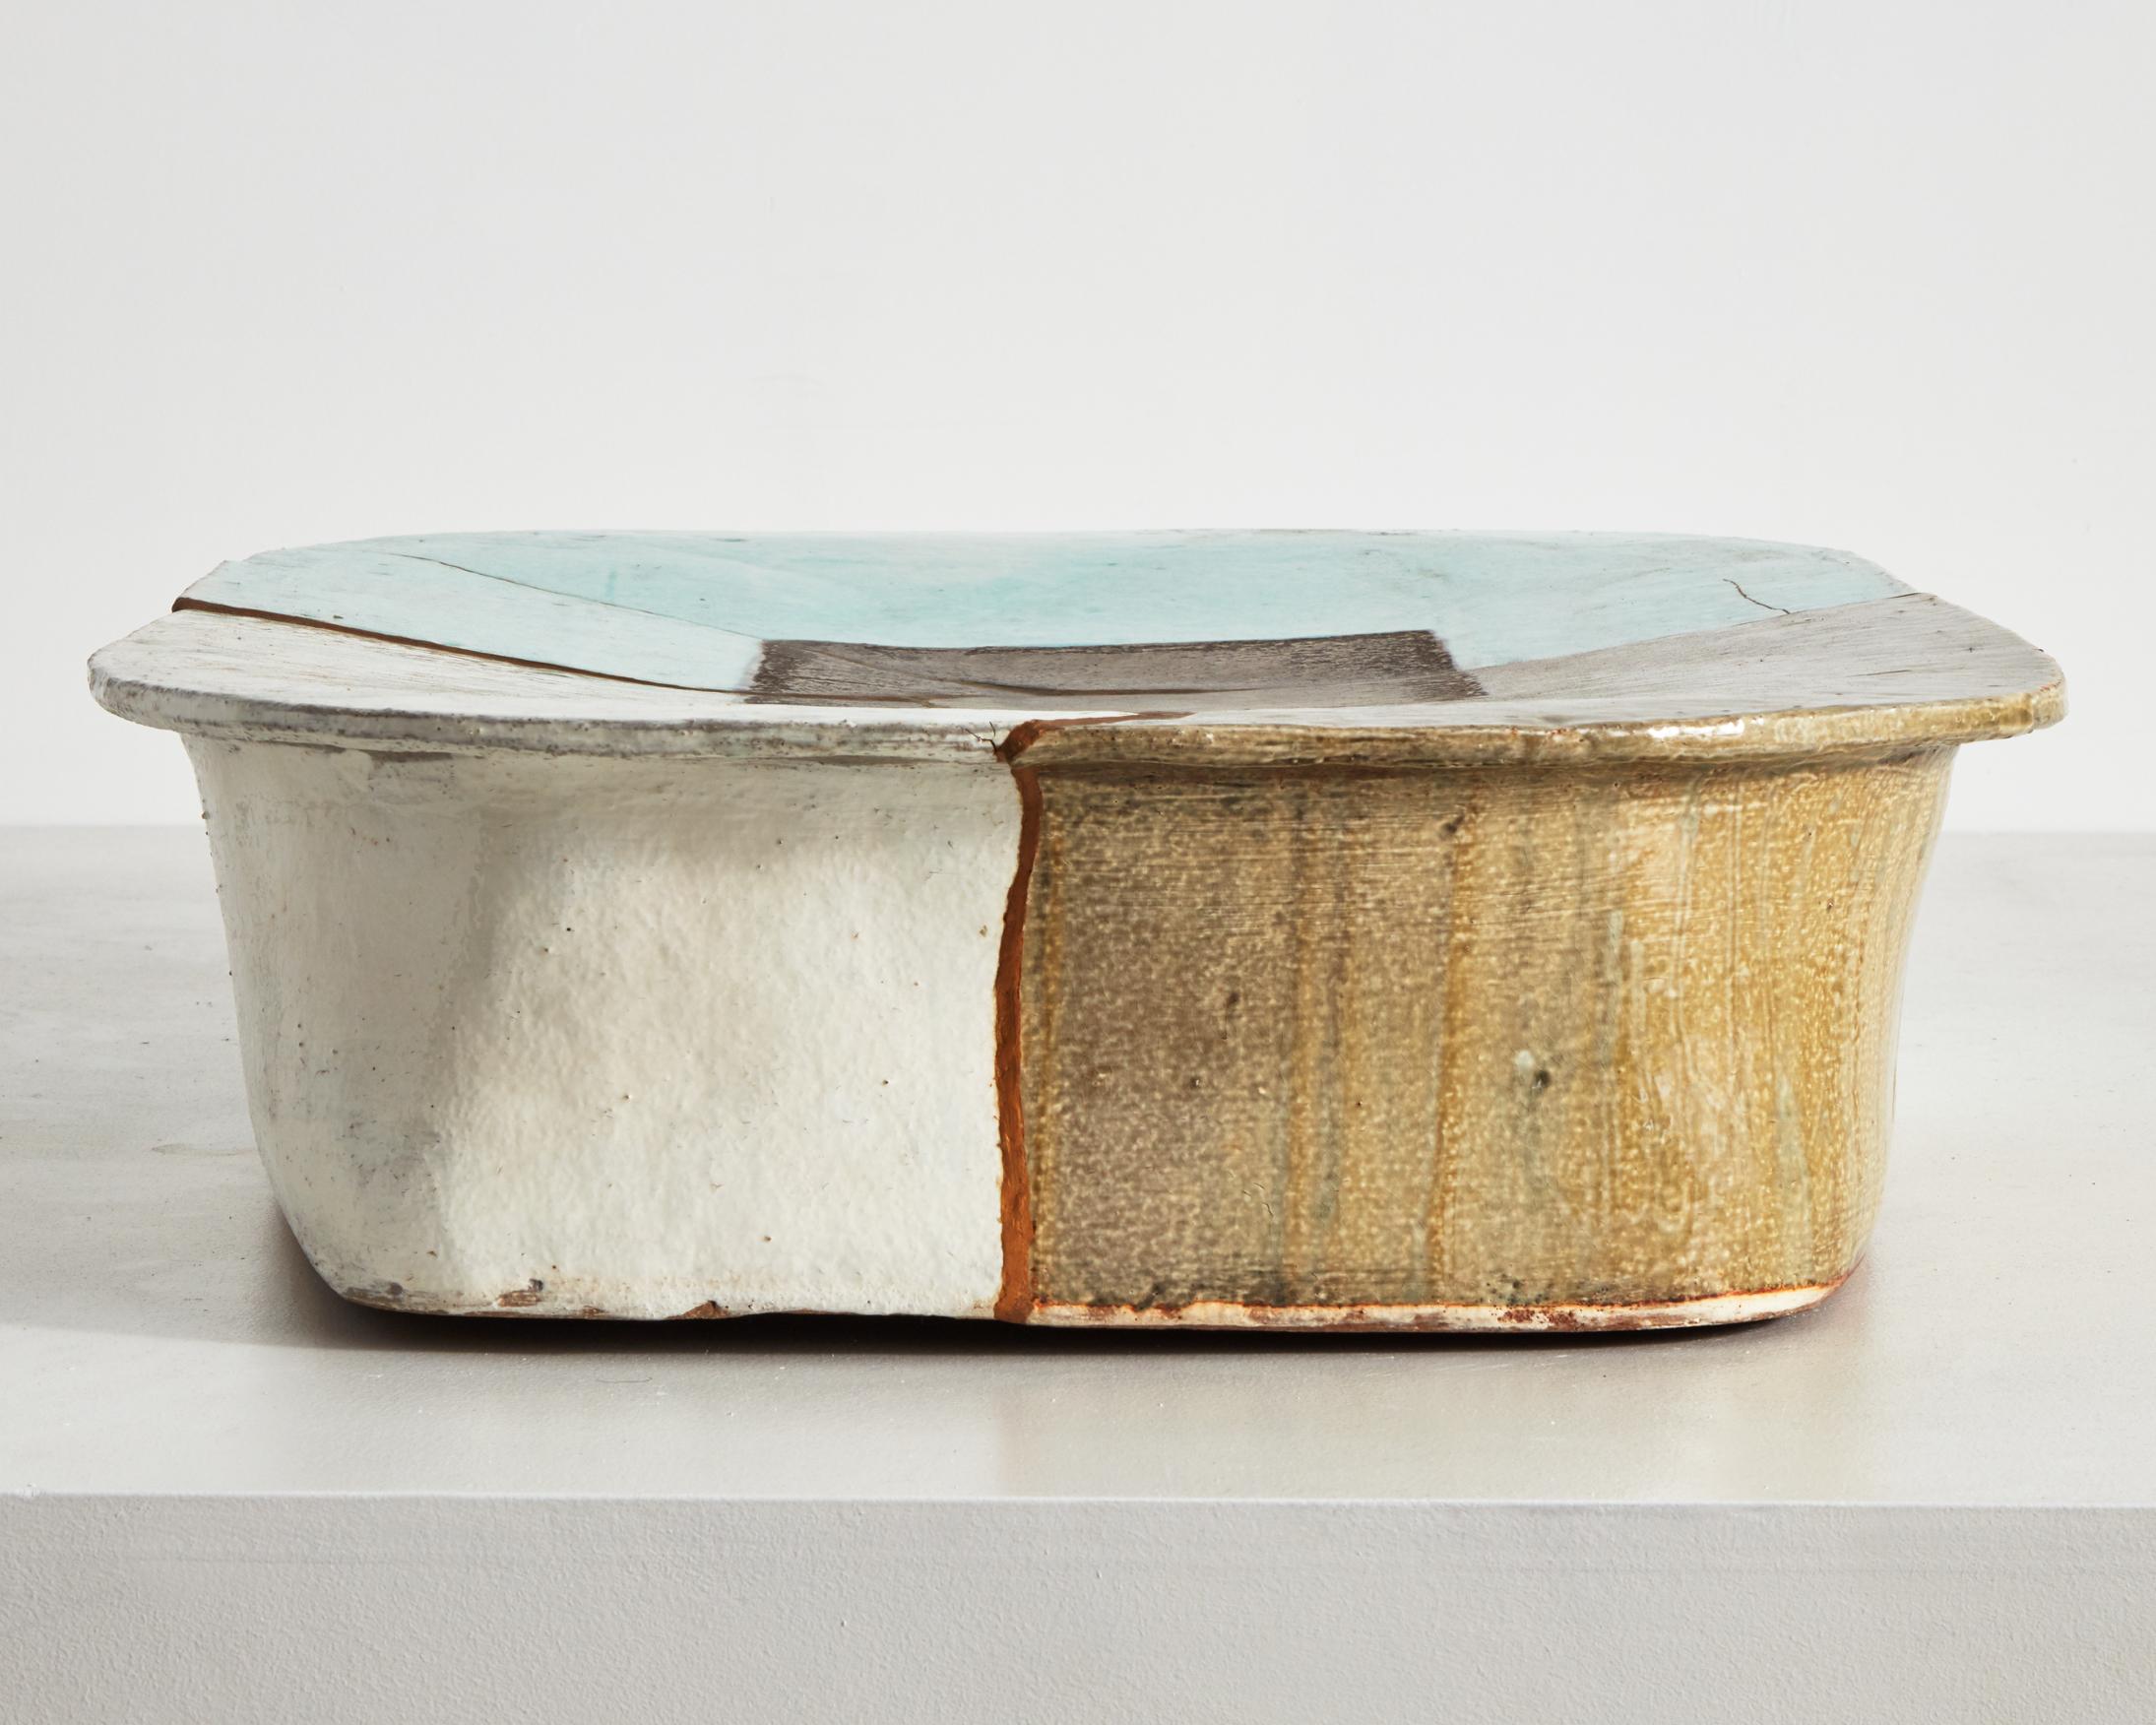 Modern Low Table in Glazed Ceramic by Hun-Chung Lee, 2018